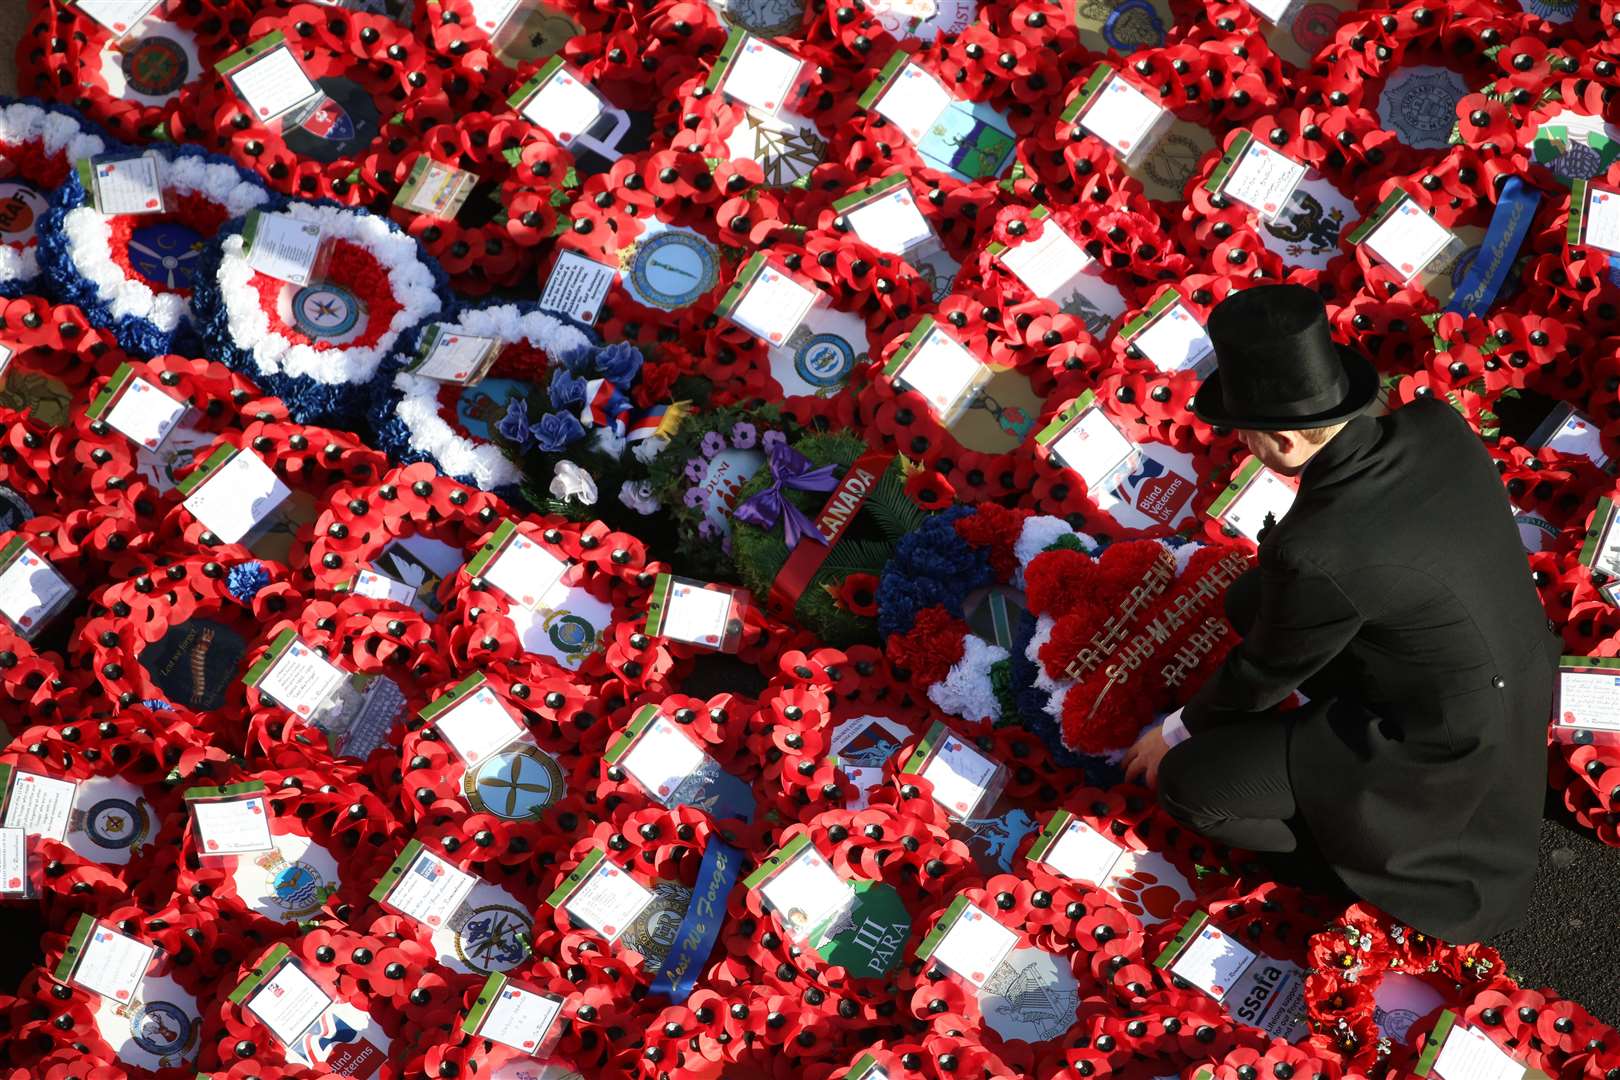 The walk marks 100 years since the end of the First World War, which is commemorated with poppies